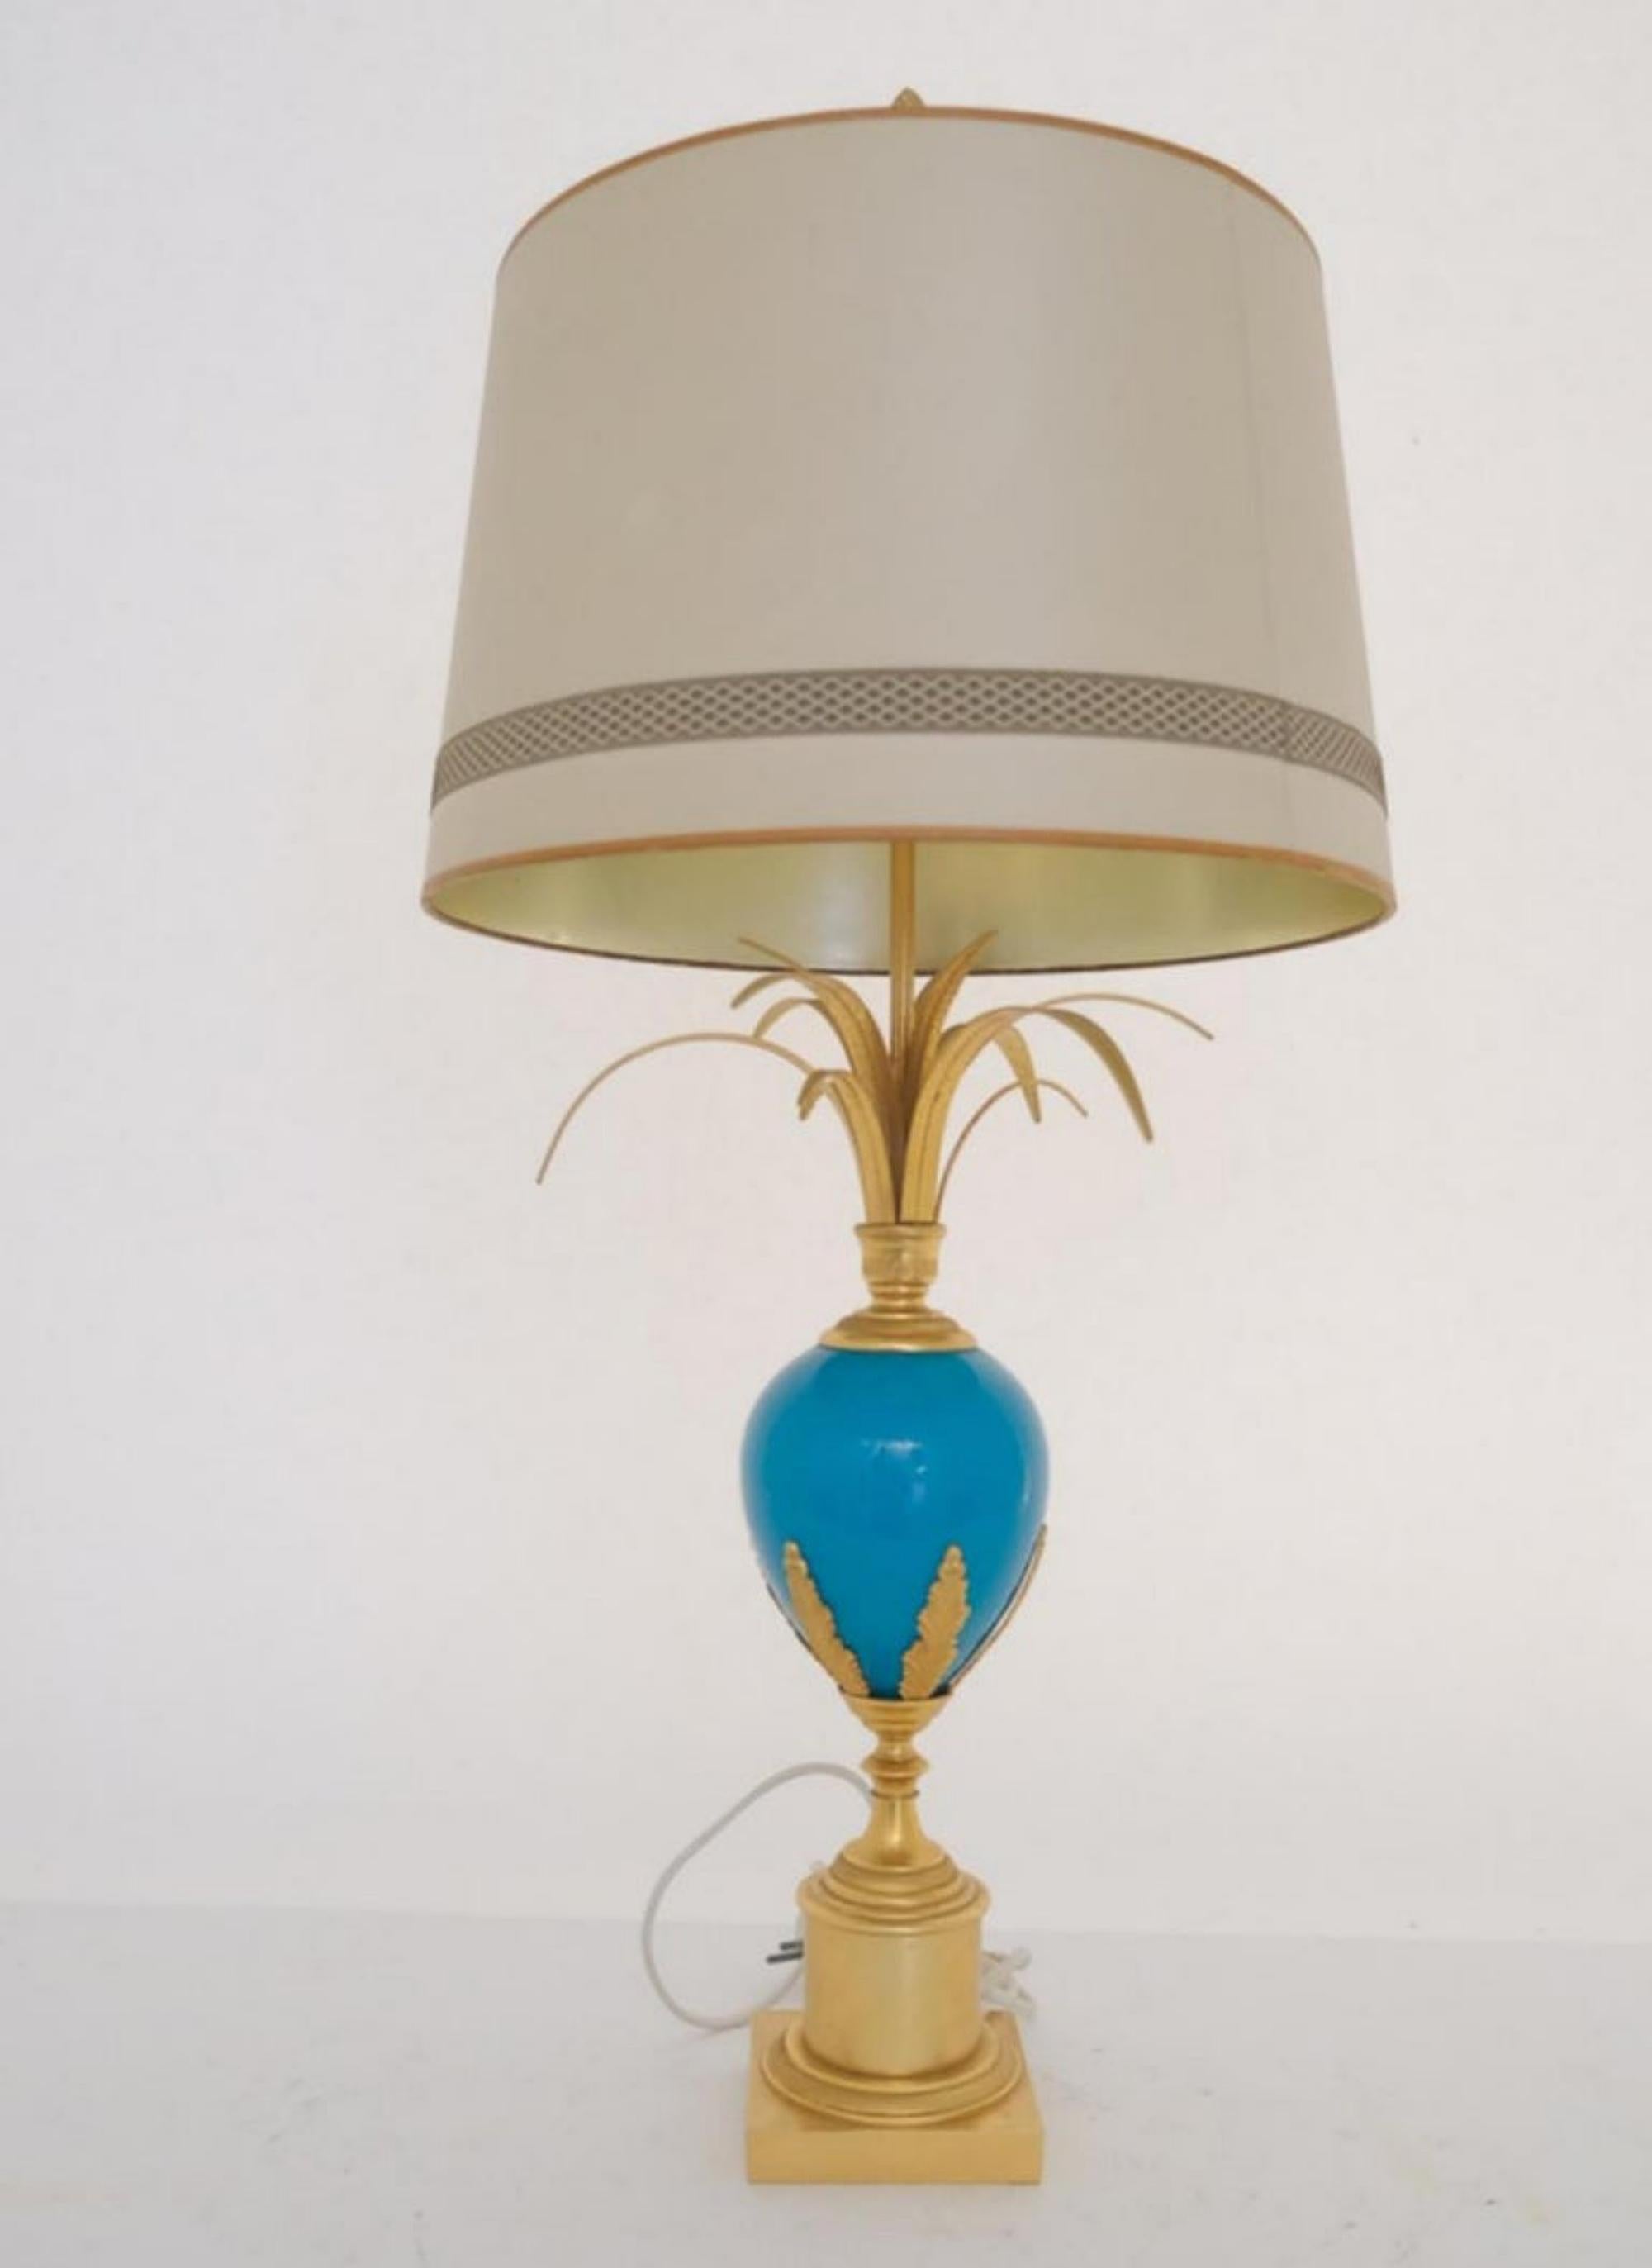 Blue Turquoise Opaline Ostrich Egg Table Lamp, S.A. Boulanger

Blue turquoise ostrich egg table lamp by S.A. Boulanger.  A stylish table lamp with a blue opaline ostrich egg and palm leaves on top.  The base is made of brass with moulded brass